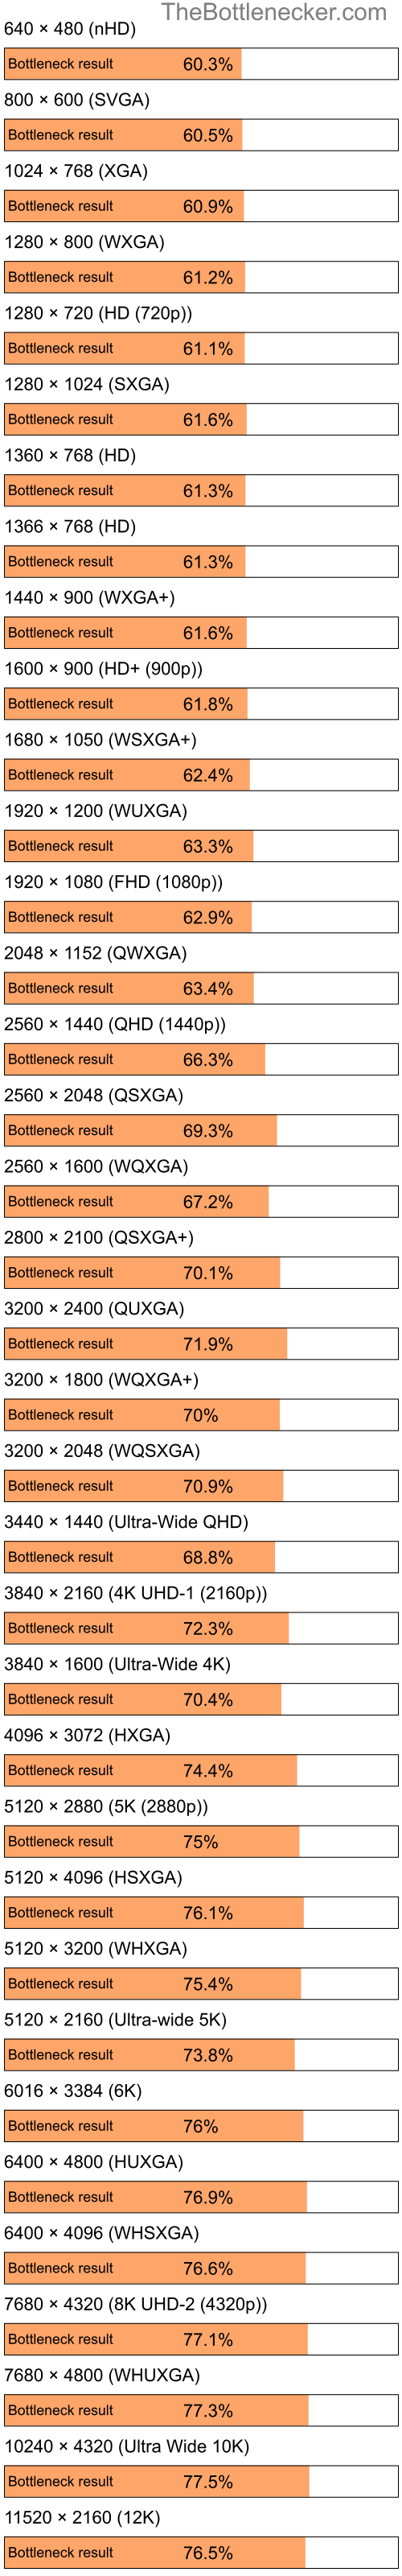 Bottleneck results by resolution for Intel Celeron and AMD Mobility Radeon X1700 in General Tasks